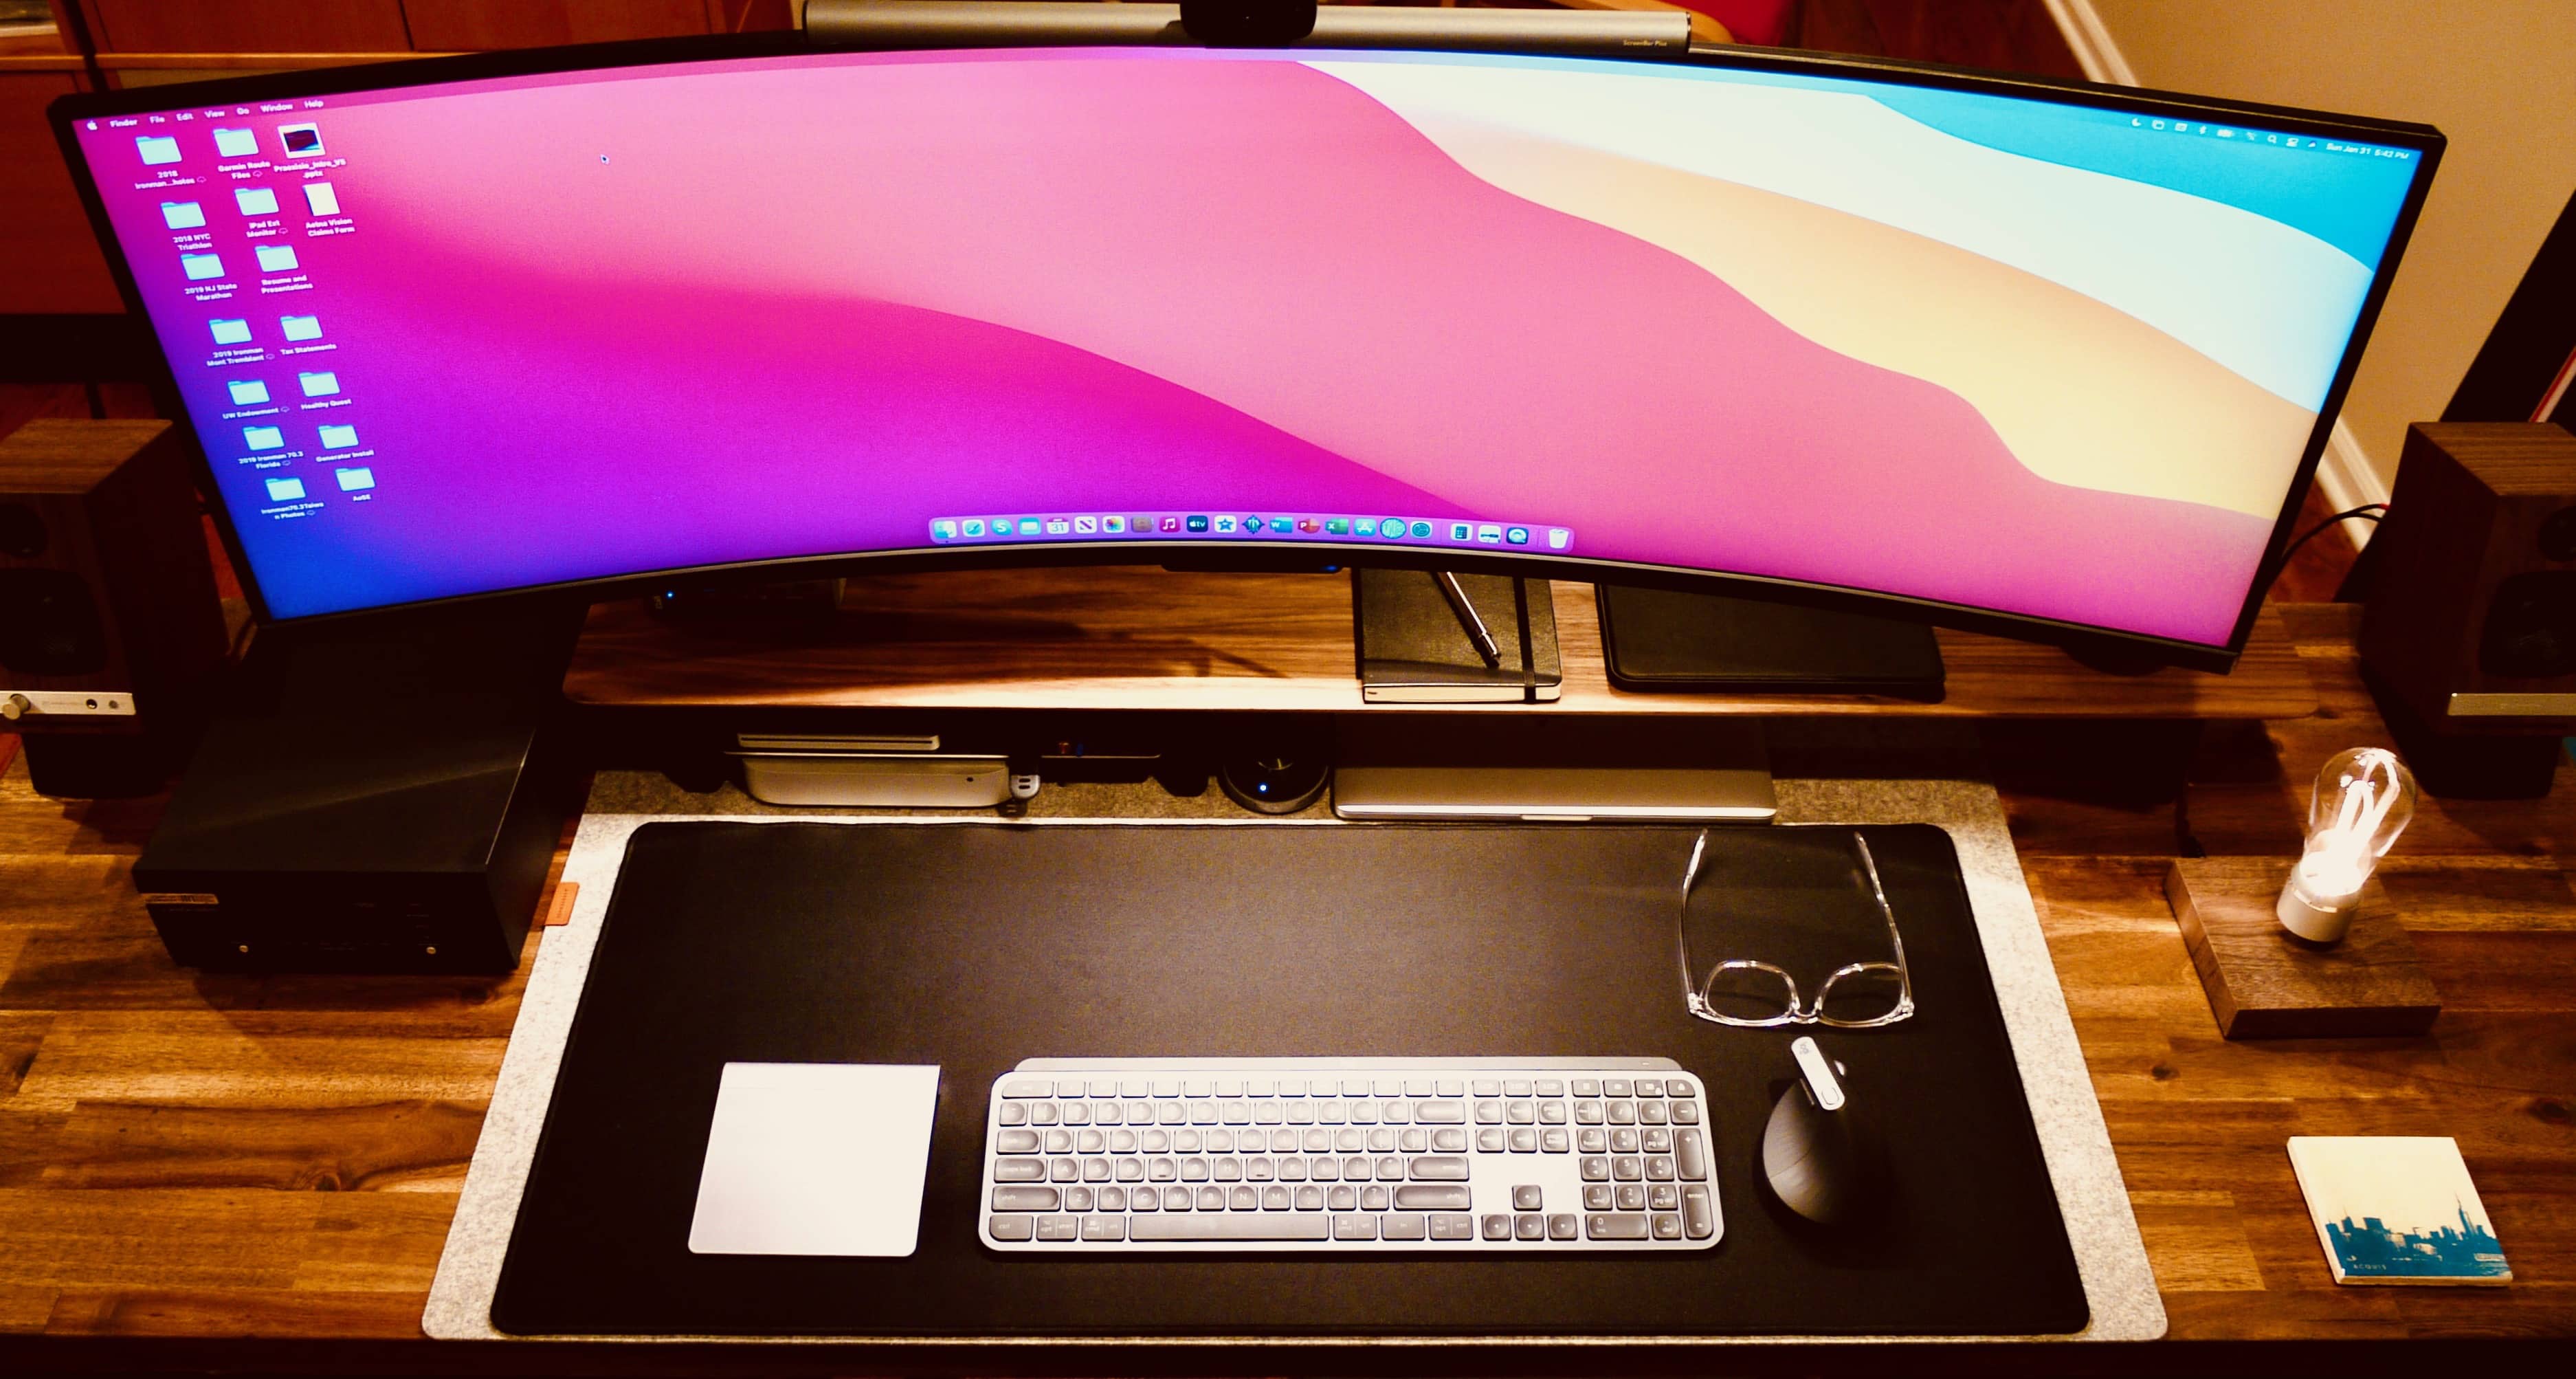 The ultra-wide screen and special lighting choices help with eye strain. 